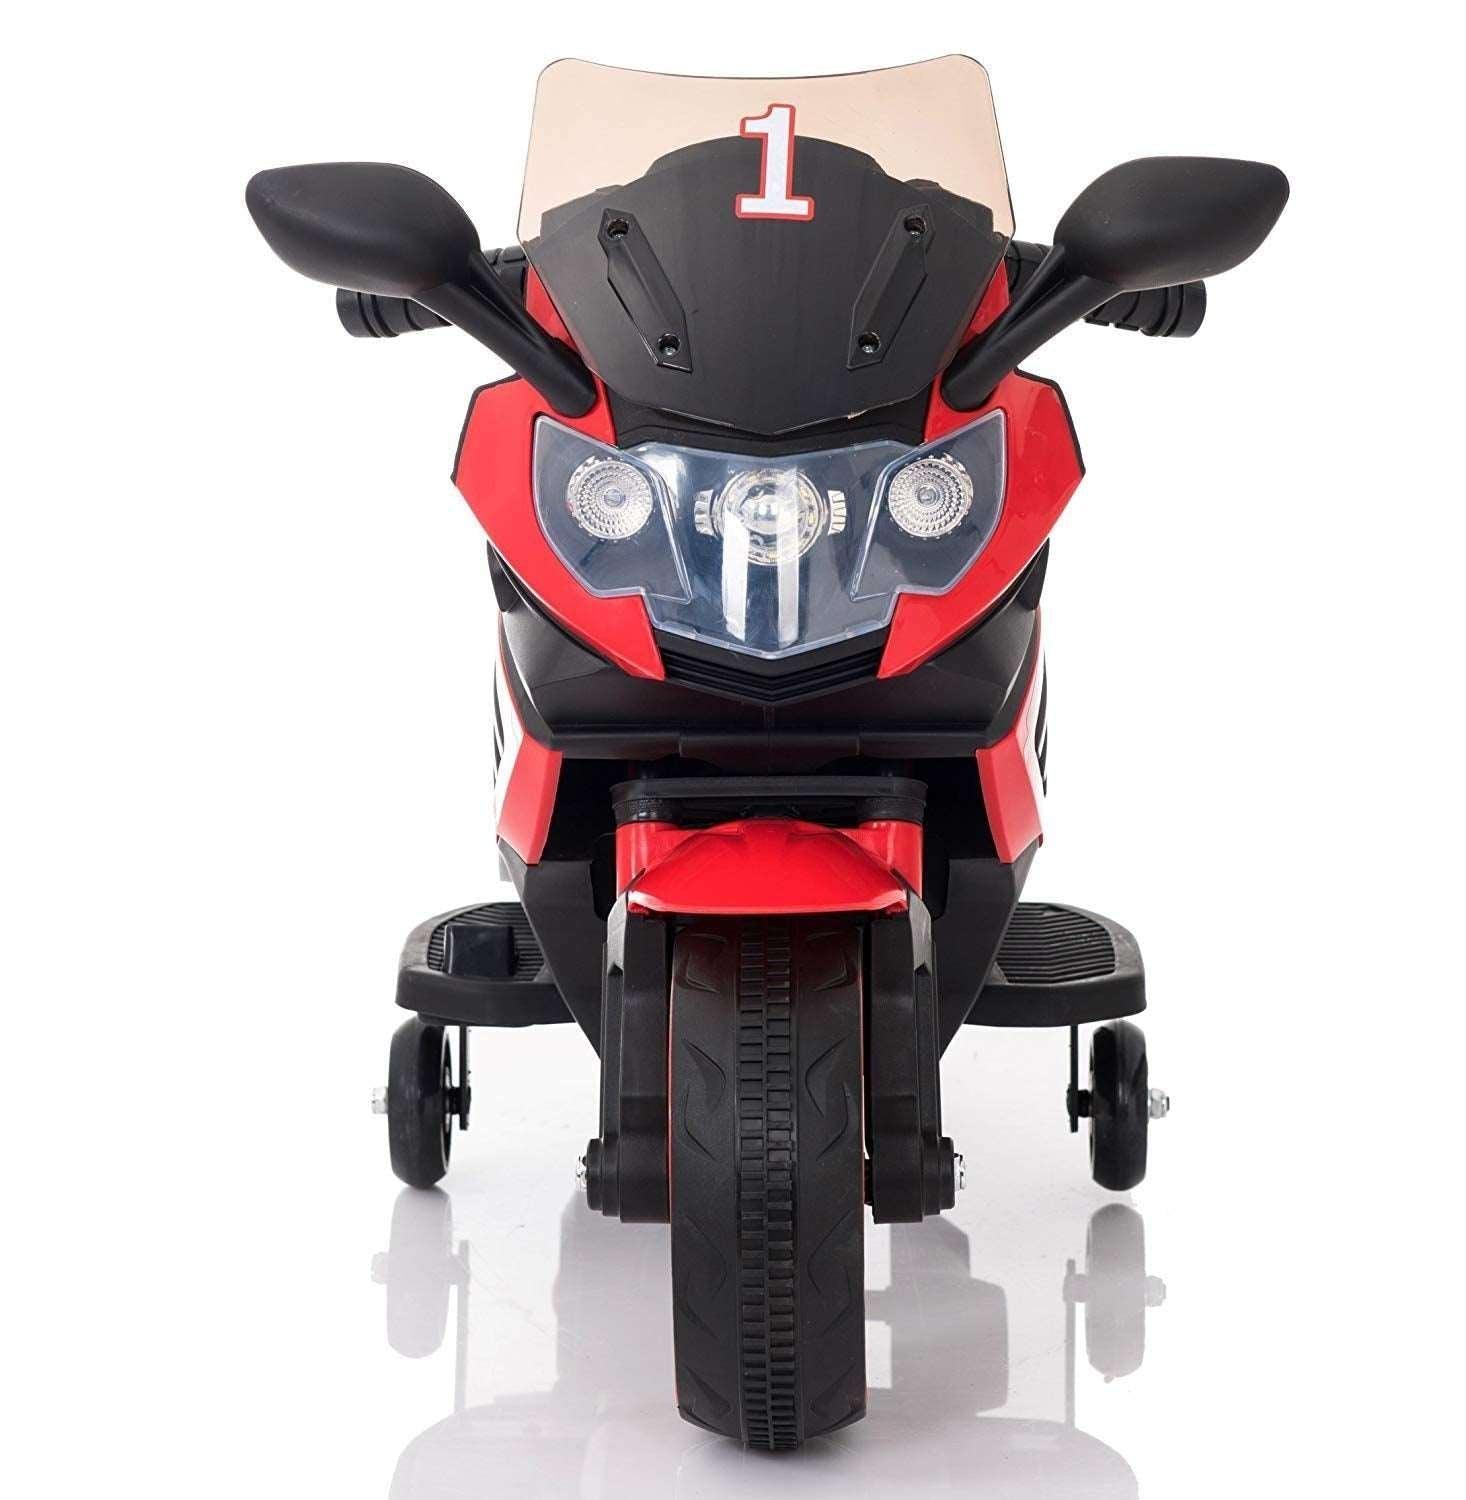 PATOYS | Super Sport Rechargeable 6V Battery Operated Ride-on Bike for kids upto 3 years Ride on Bike PATOYS